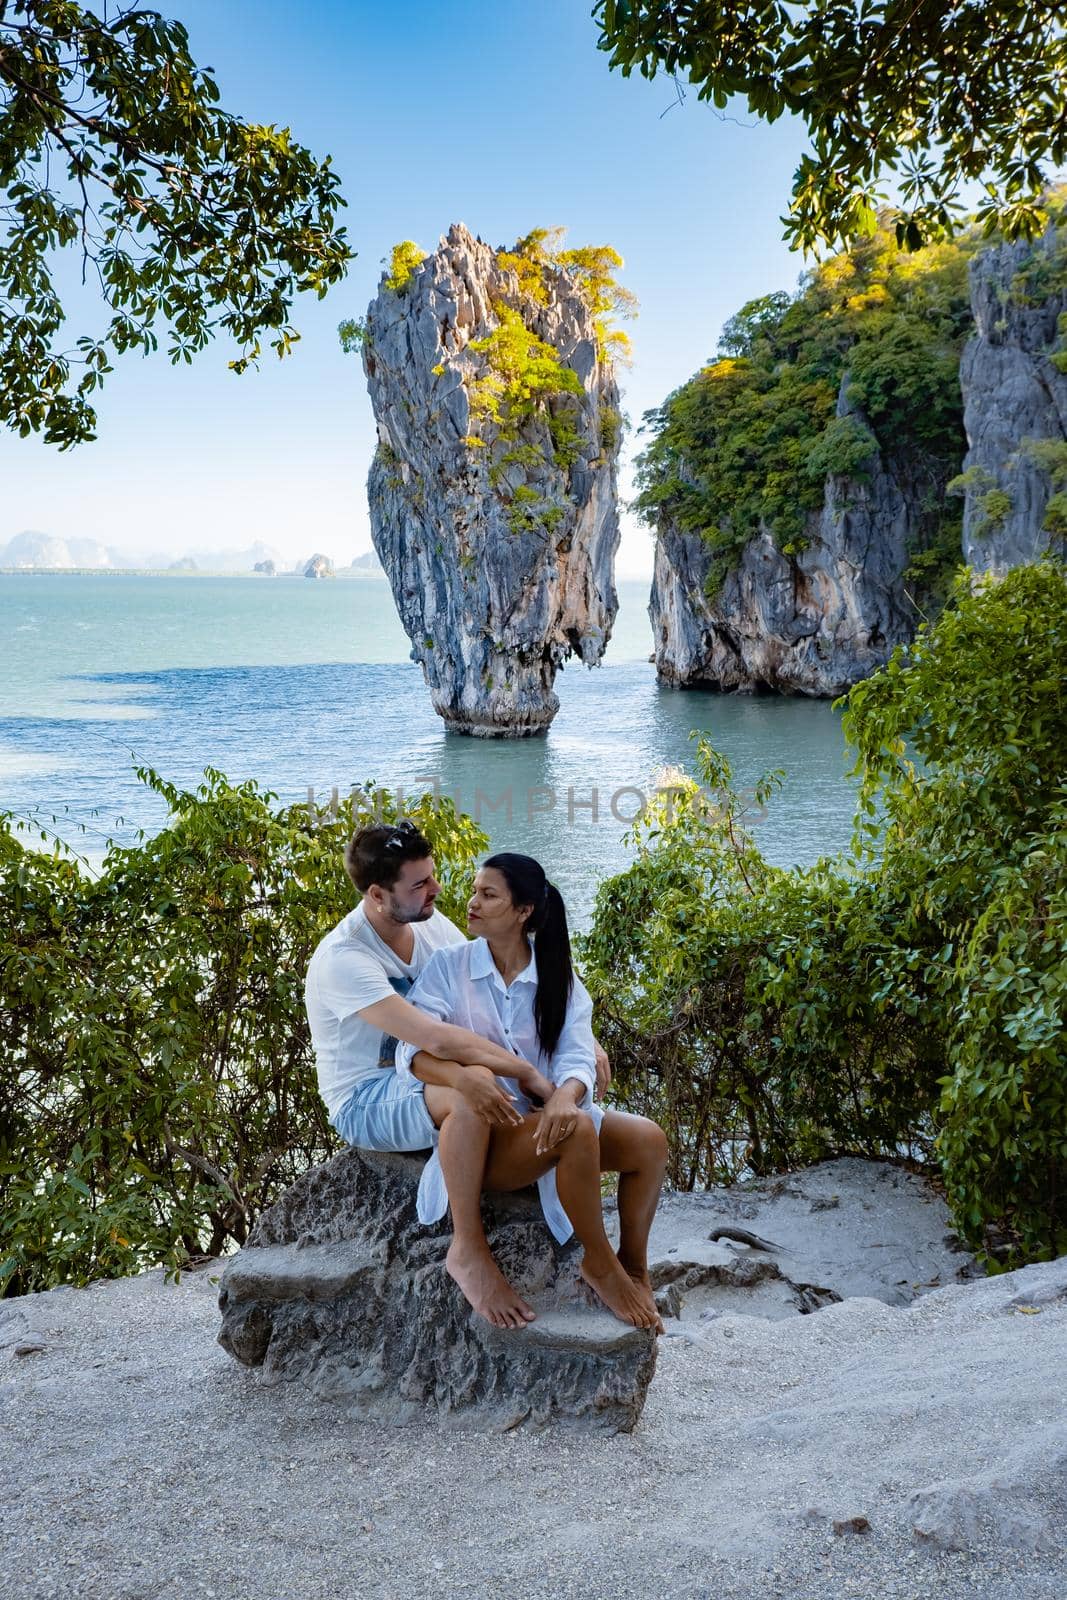 James Bond island near Phuket in Thailand. Famous landmark and famous travel destination, couple men and woman mid age visiting James Bond island in Krabi Thailand. European man and Asian woman on vacation